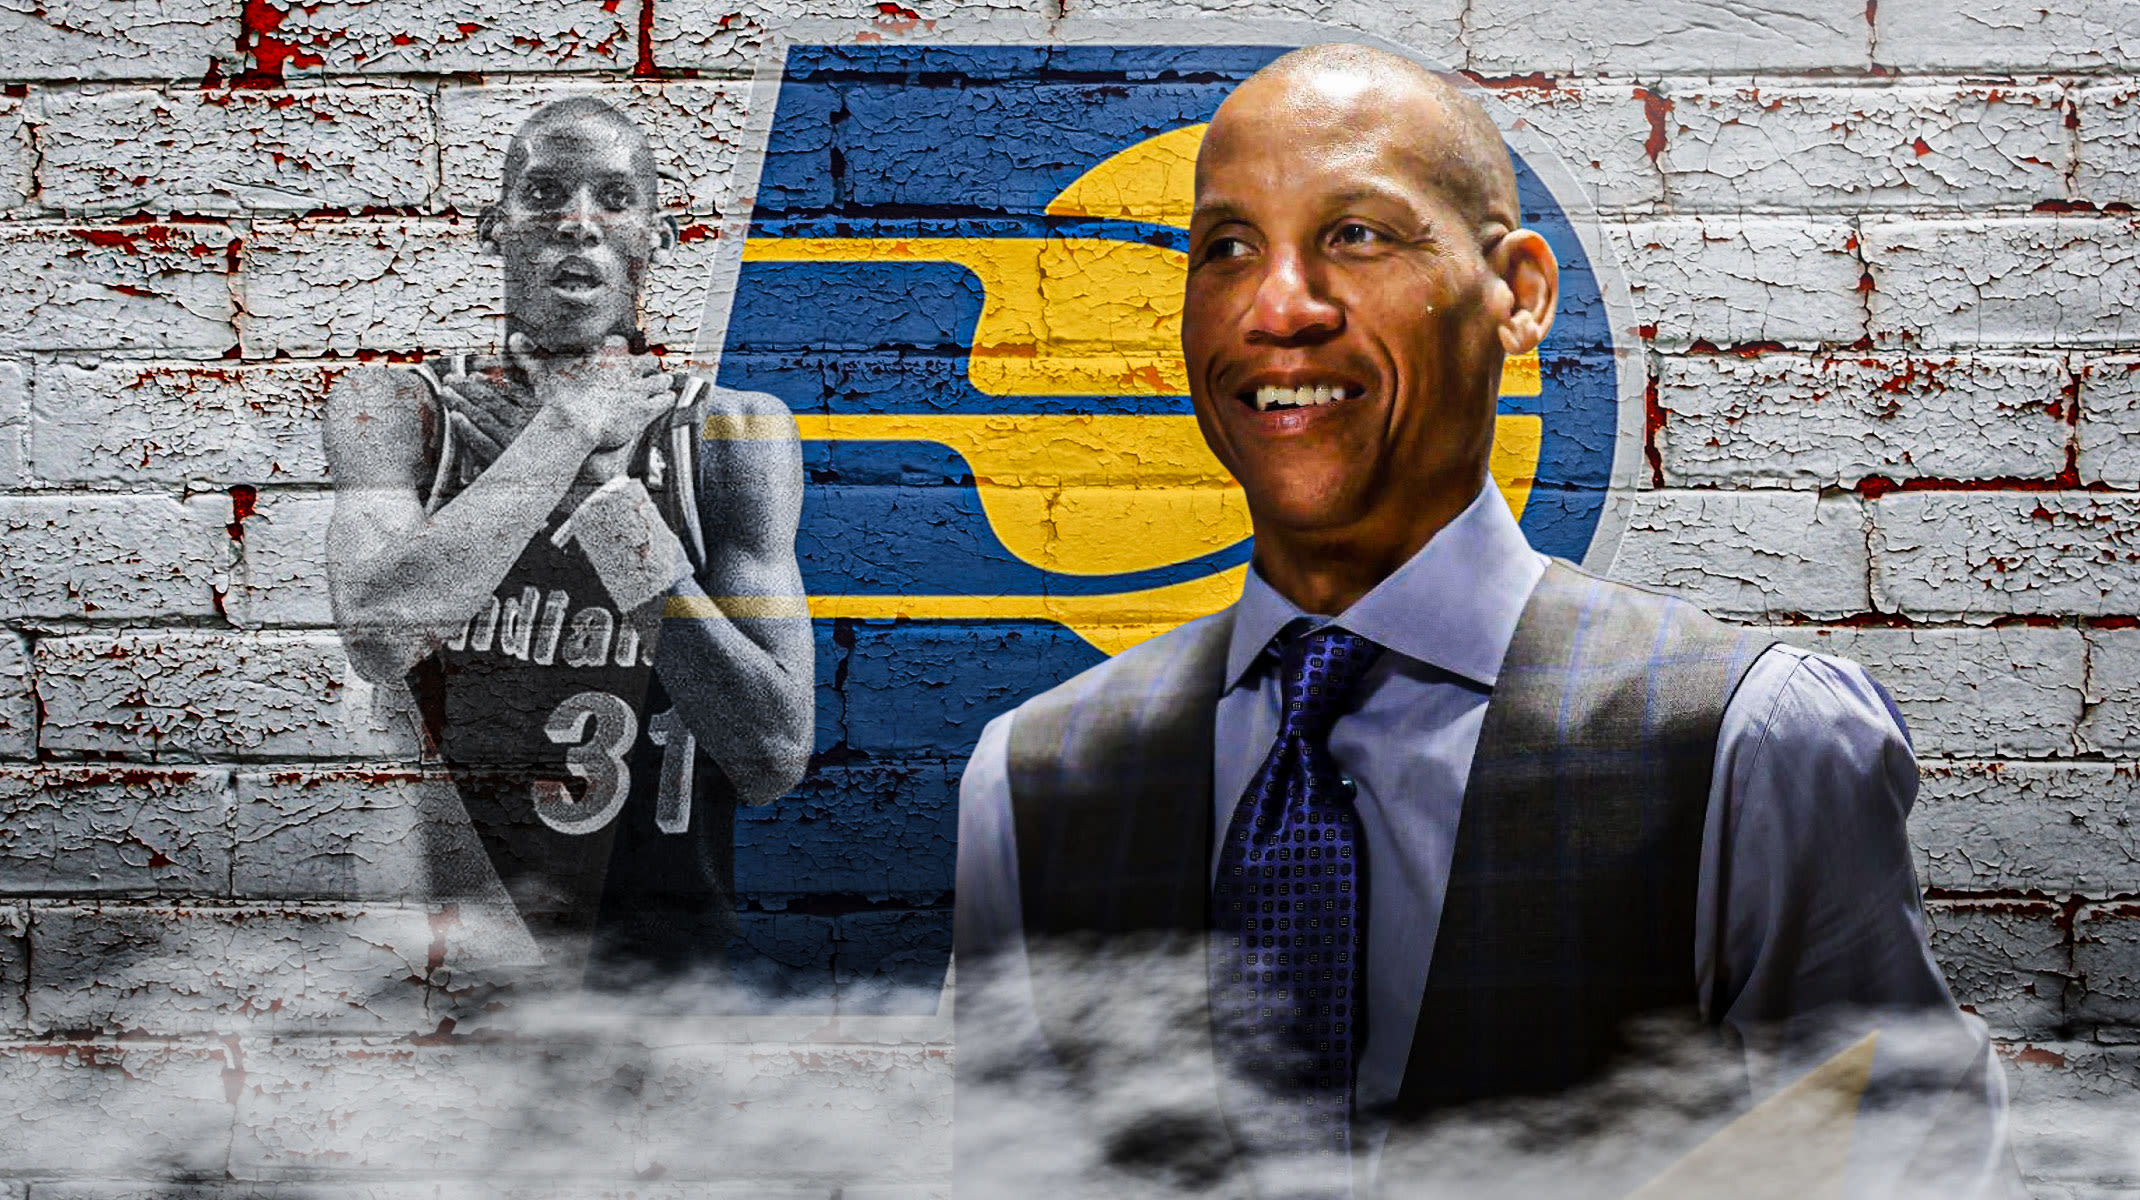 Reggie Miller's iconic '8 points in 9 seconds' anniversary will ease sting of Pacers' Game 1 loss to Knicks